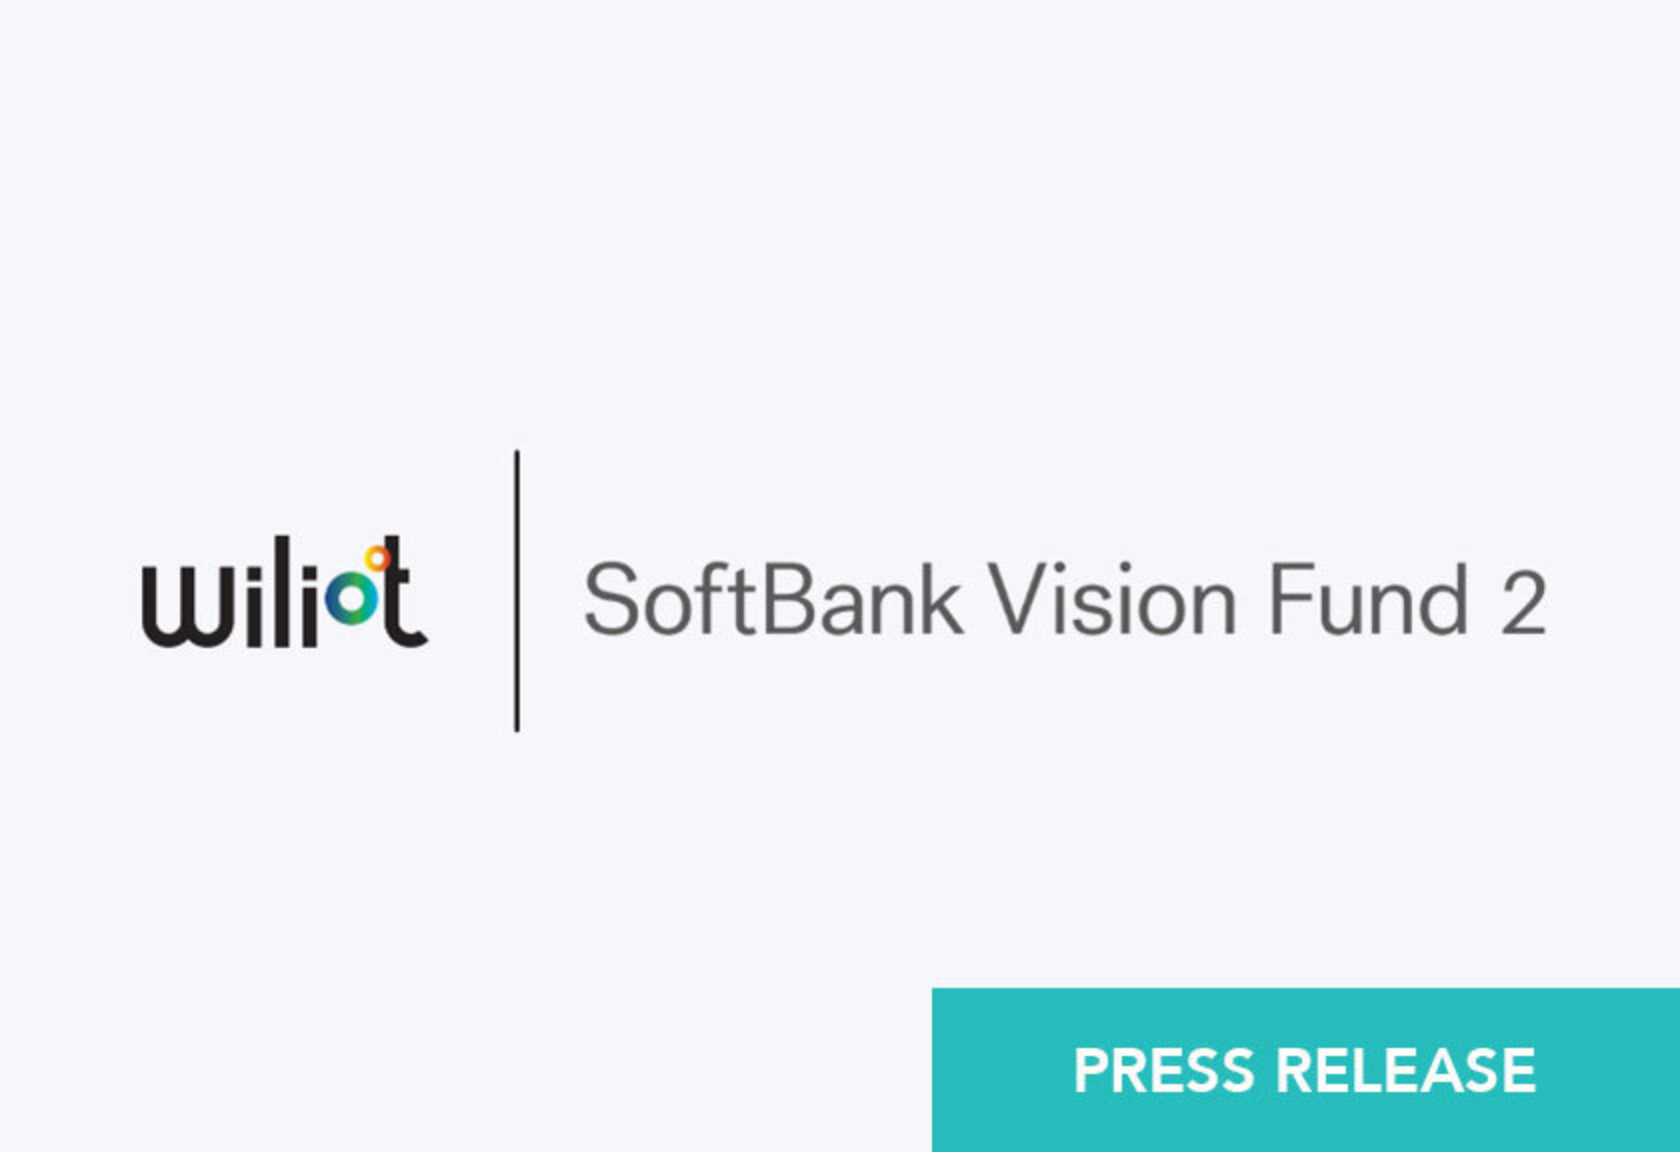 IoT Pioneer Wiliot Secures $200 Million Investment Round Led by SoftBank Vision Fund 2